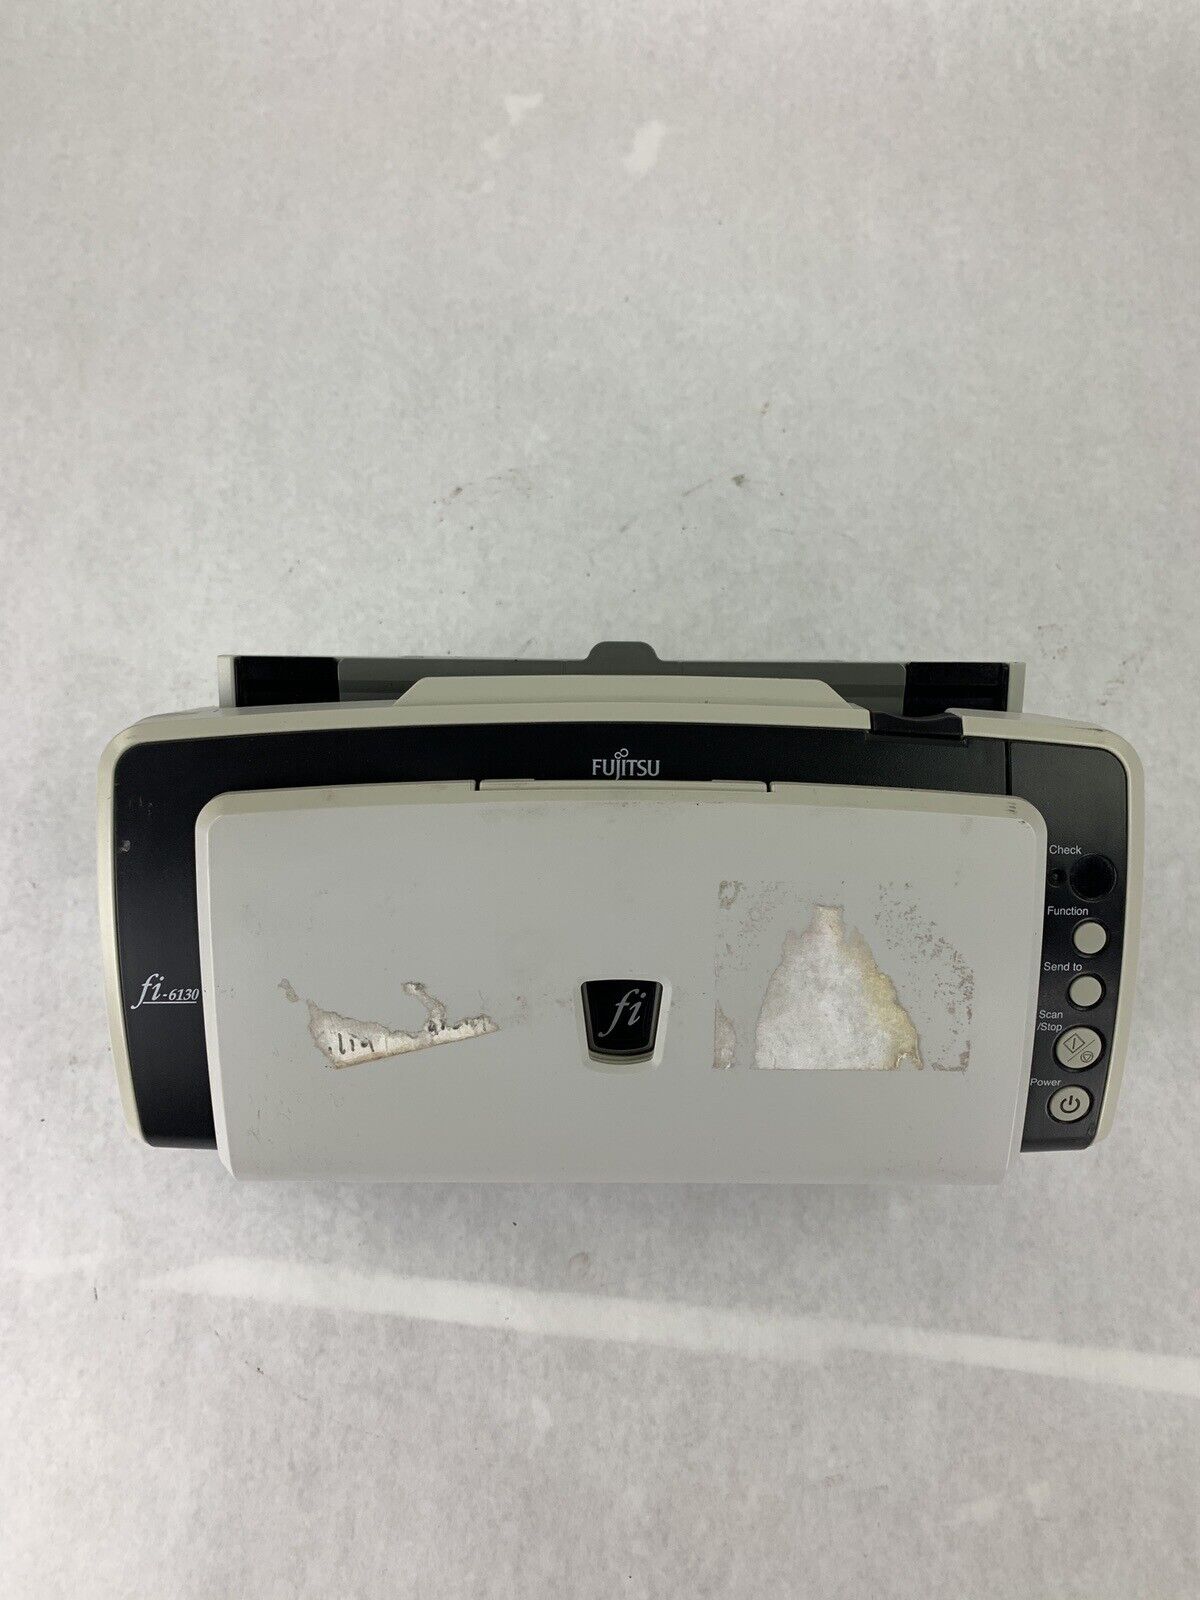 Fujitsu FI-6130 Flatbed Scanner Missing Guide Tray Rollers Going Bad